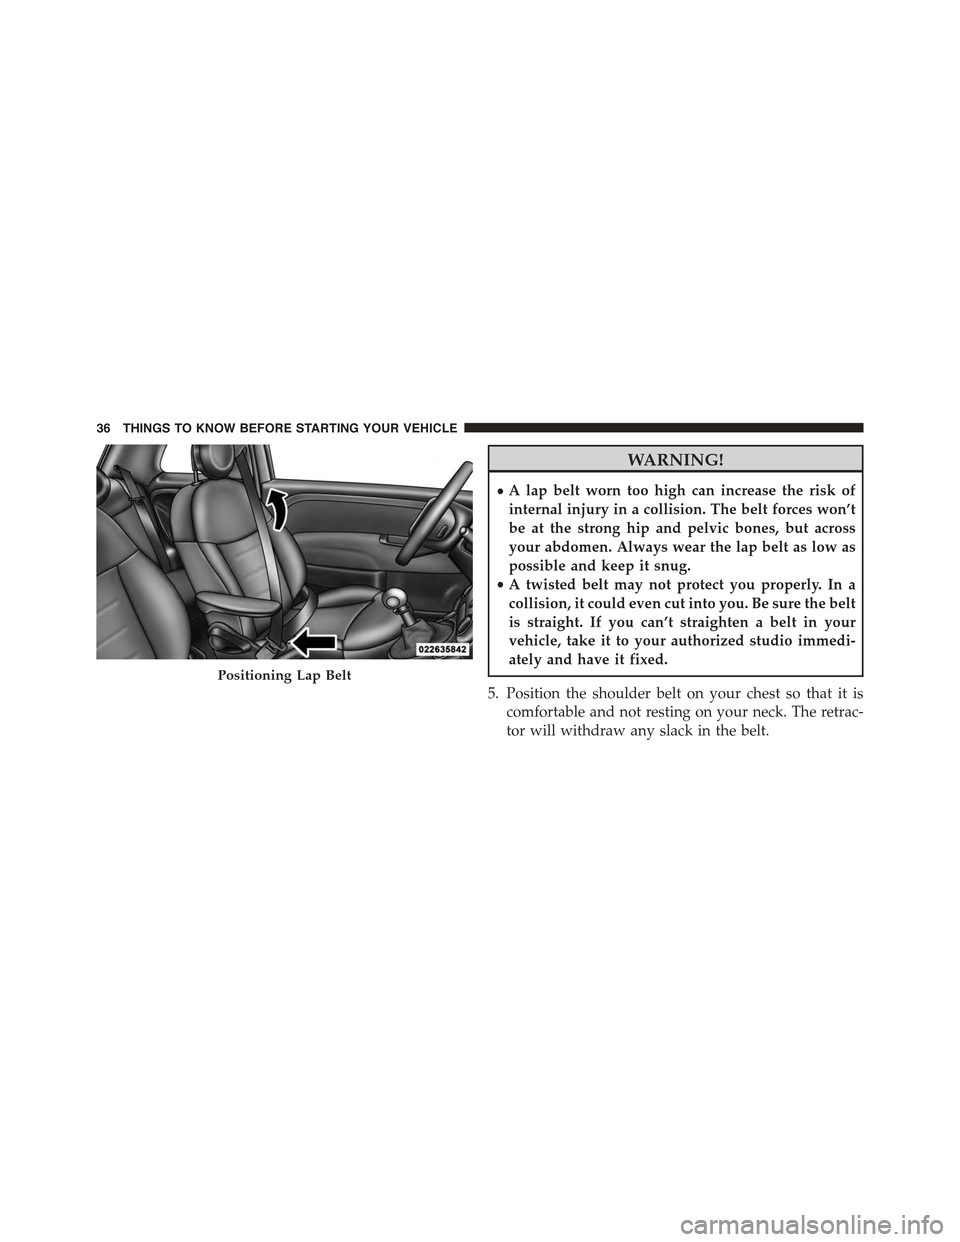 FIAT 500C 2013 2.G Owners Guide WARNING!
•A lap belt worn too high can increase the risk of
internal injury in a collision. The belt forces won’t
be at the strong hip and pelvic bones, but across
your abdomen. Always wear the la